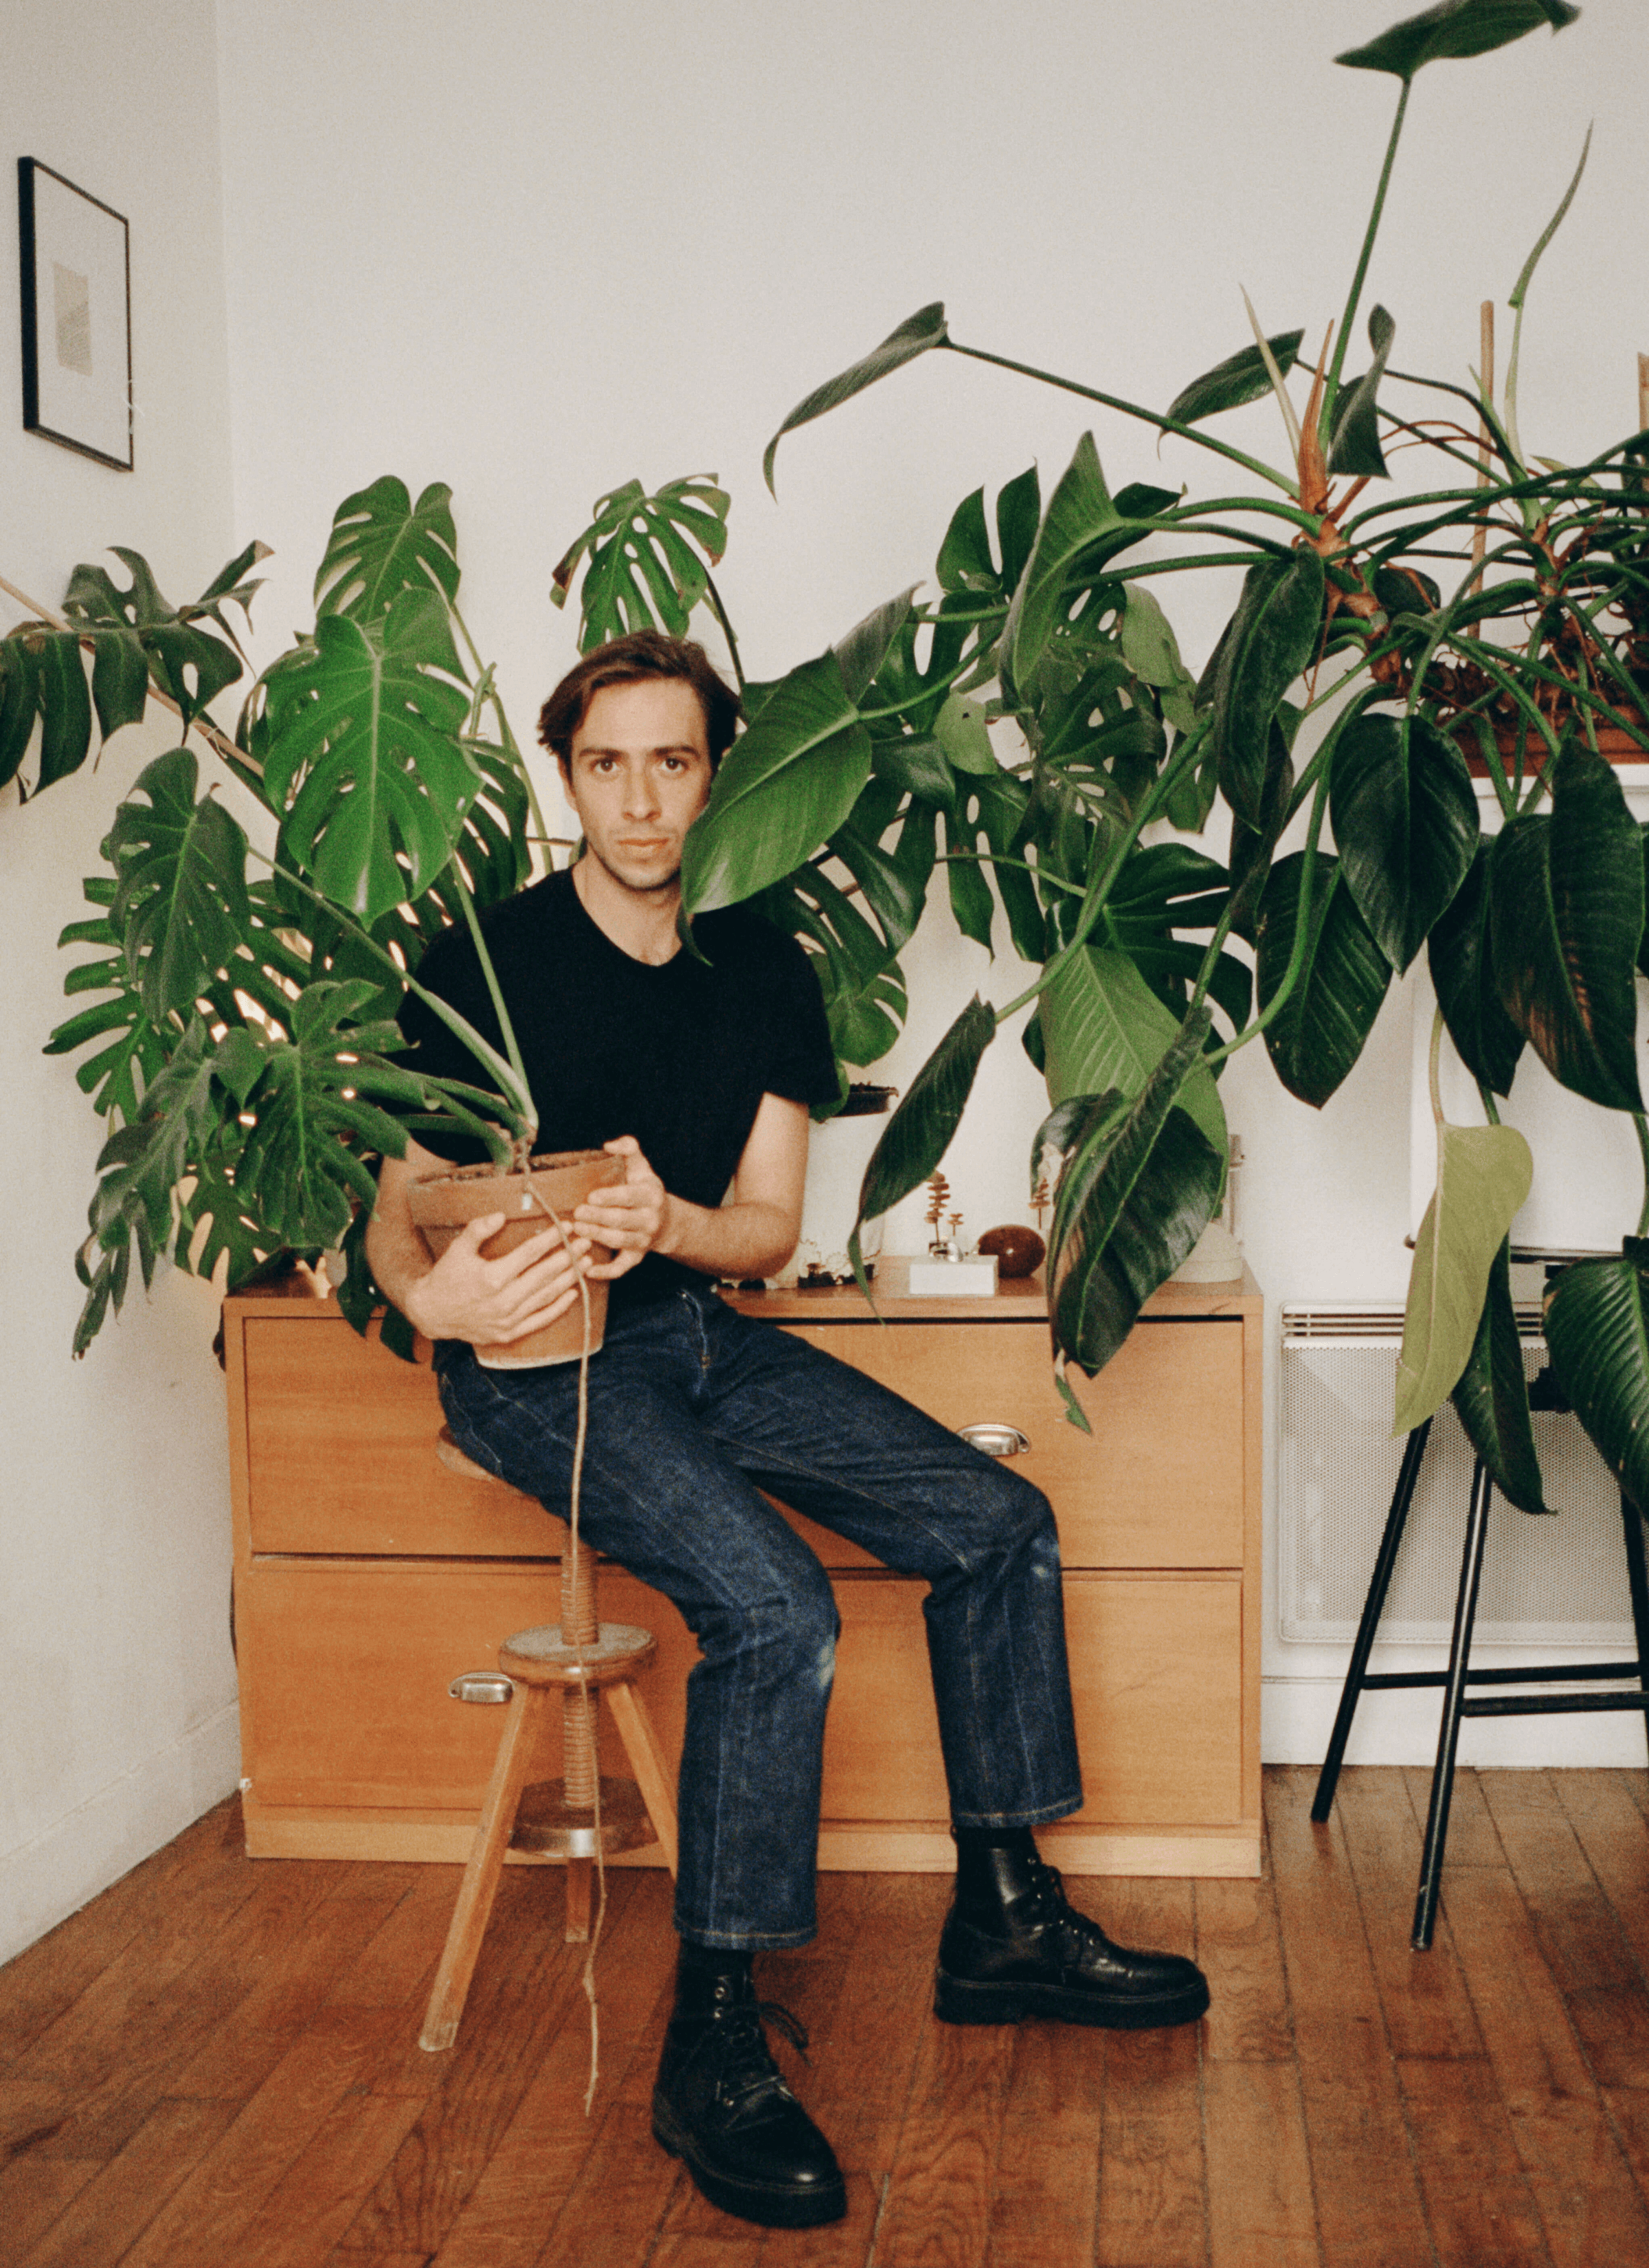 Toni wears a black t-shirt, jeans and a pair of black shoes sitting on the chair while holding a potted plant in his arms and being taken a photo with it. There is a potted Philodendron erubescens next to Toni while there is a cupboard behind him as well.